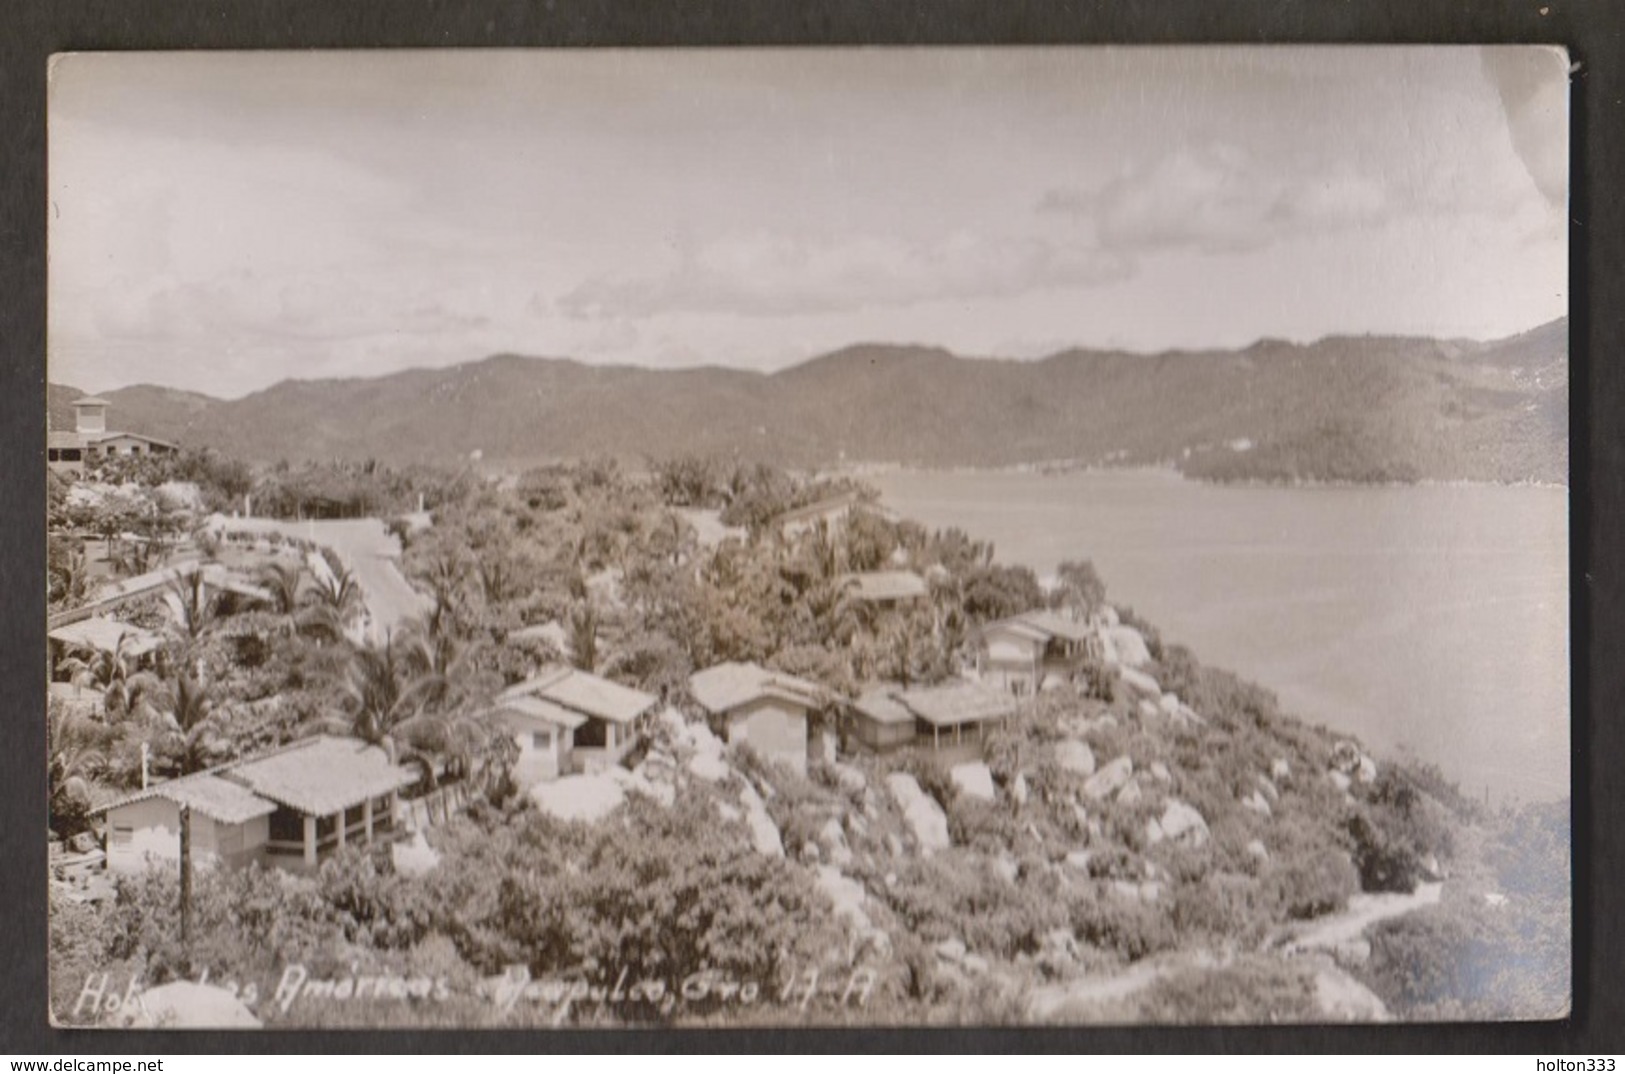 View Of Vacation Homes, Acapulco, Mexico - Real Photo - Unused 1950s - Mexico